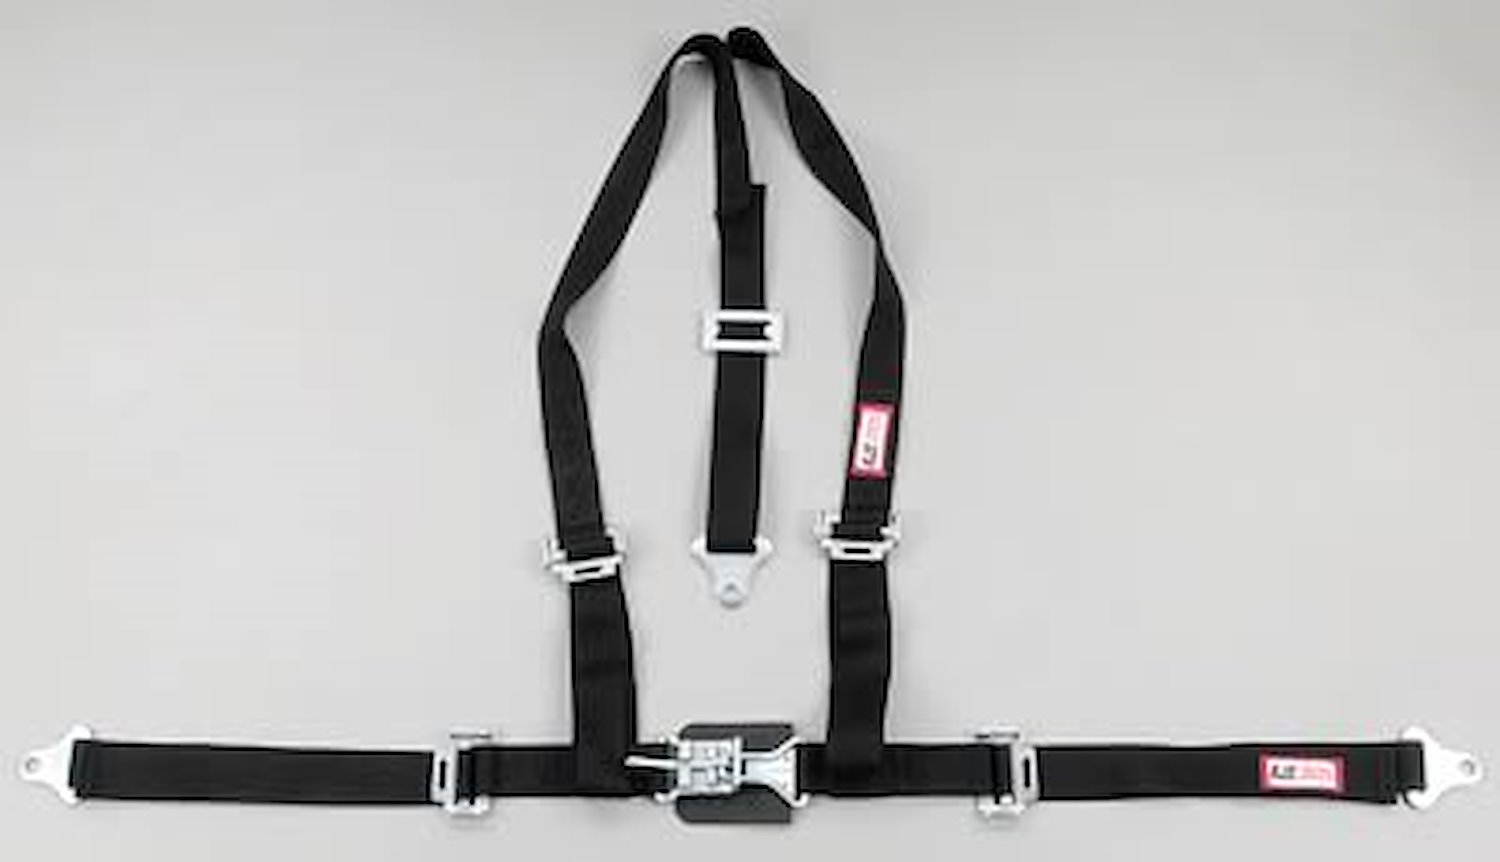 NON-SFI L&L HARNESS 3 PULL UP Lap Belt SNAP SEWN IN 2 S.H. Individual FLOOR Mount w/STERNUM STRAP WRAP/SNAP RED